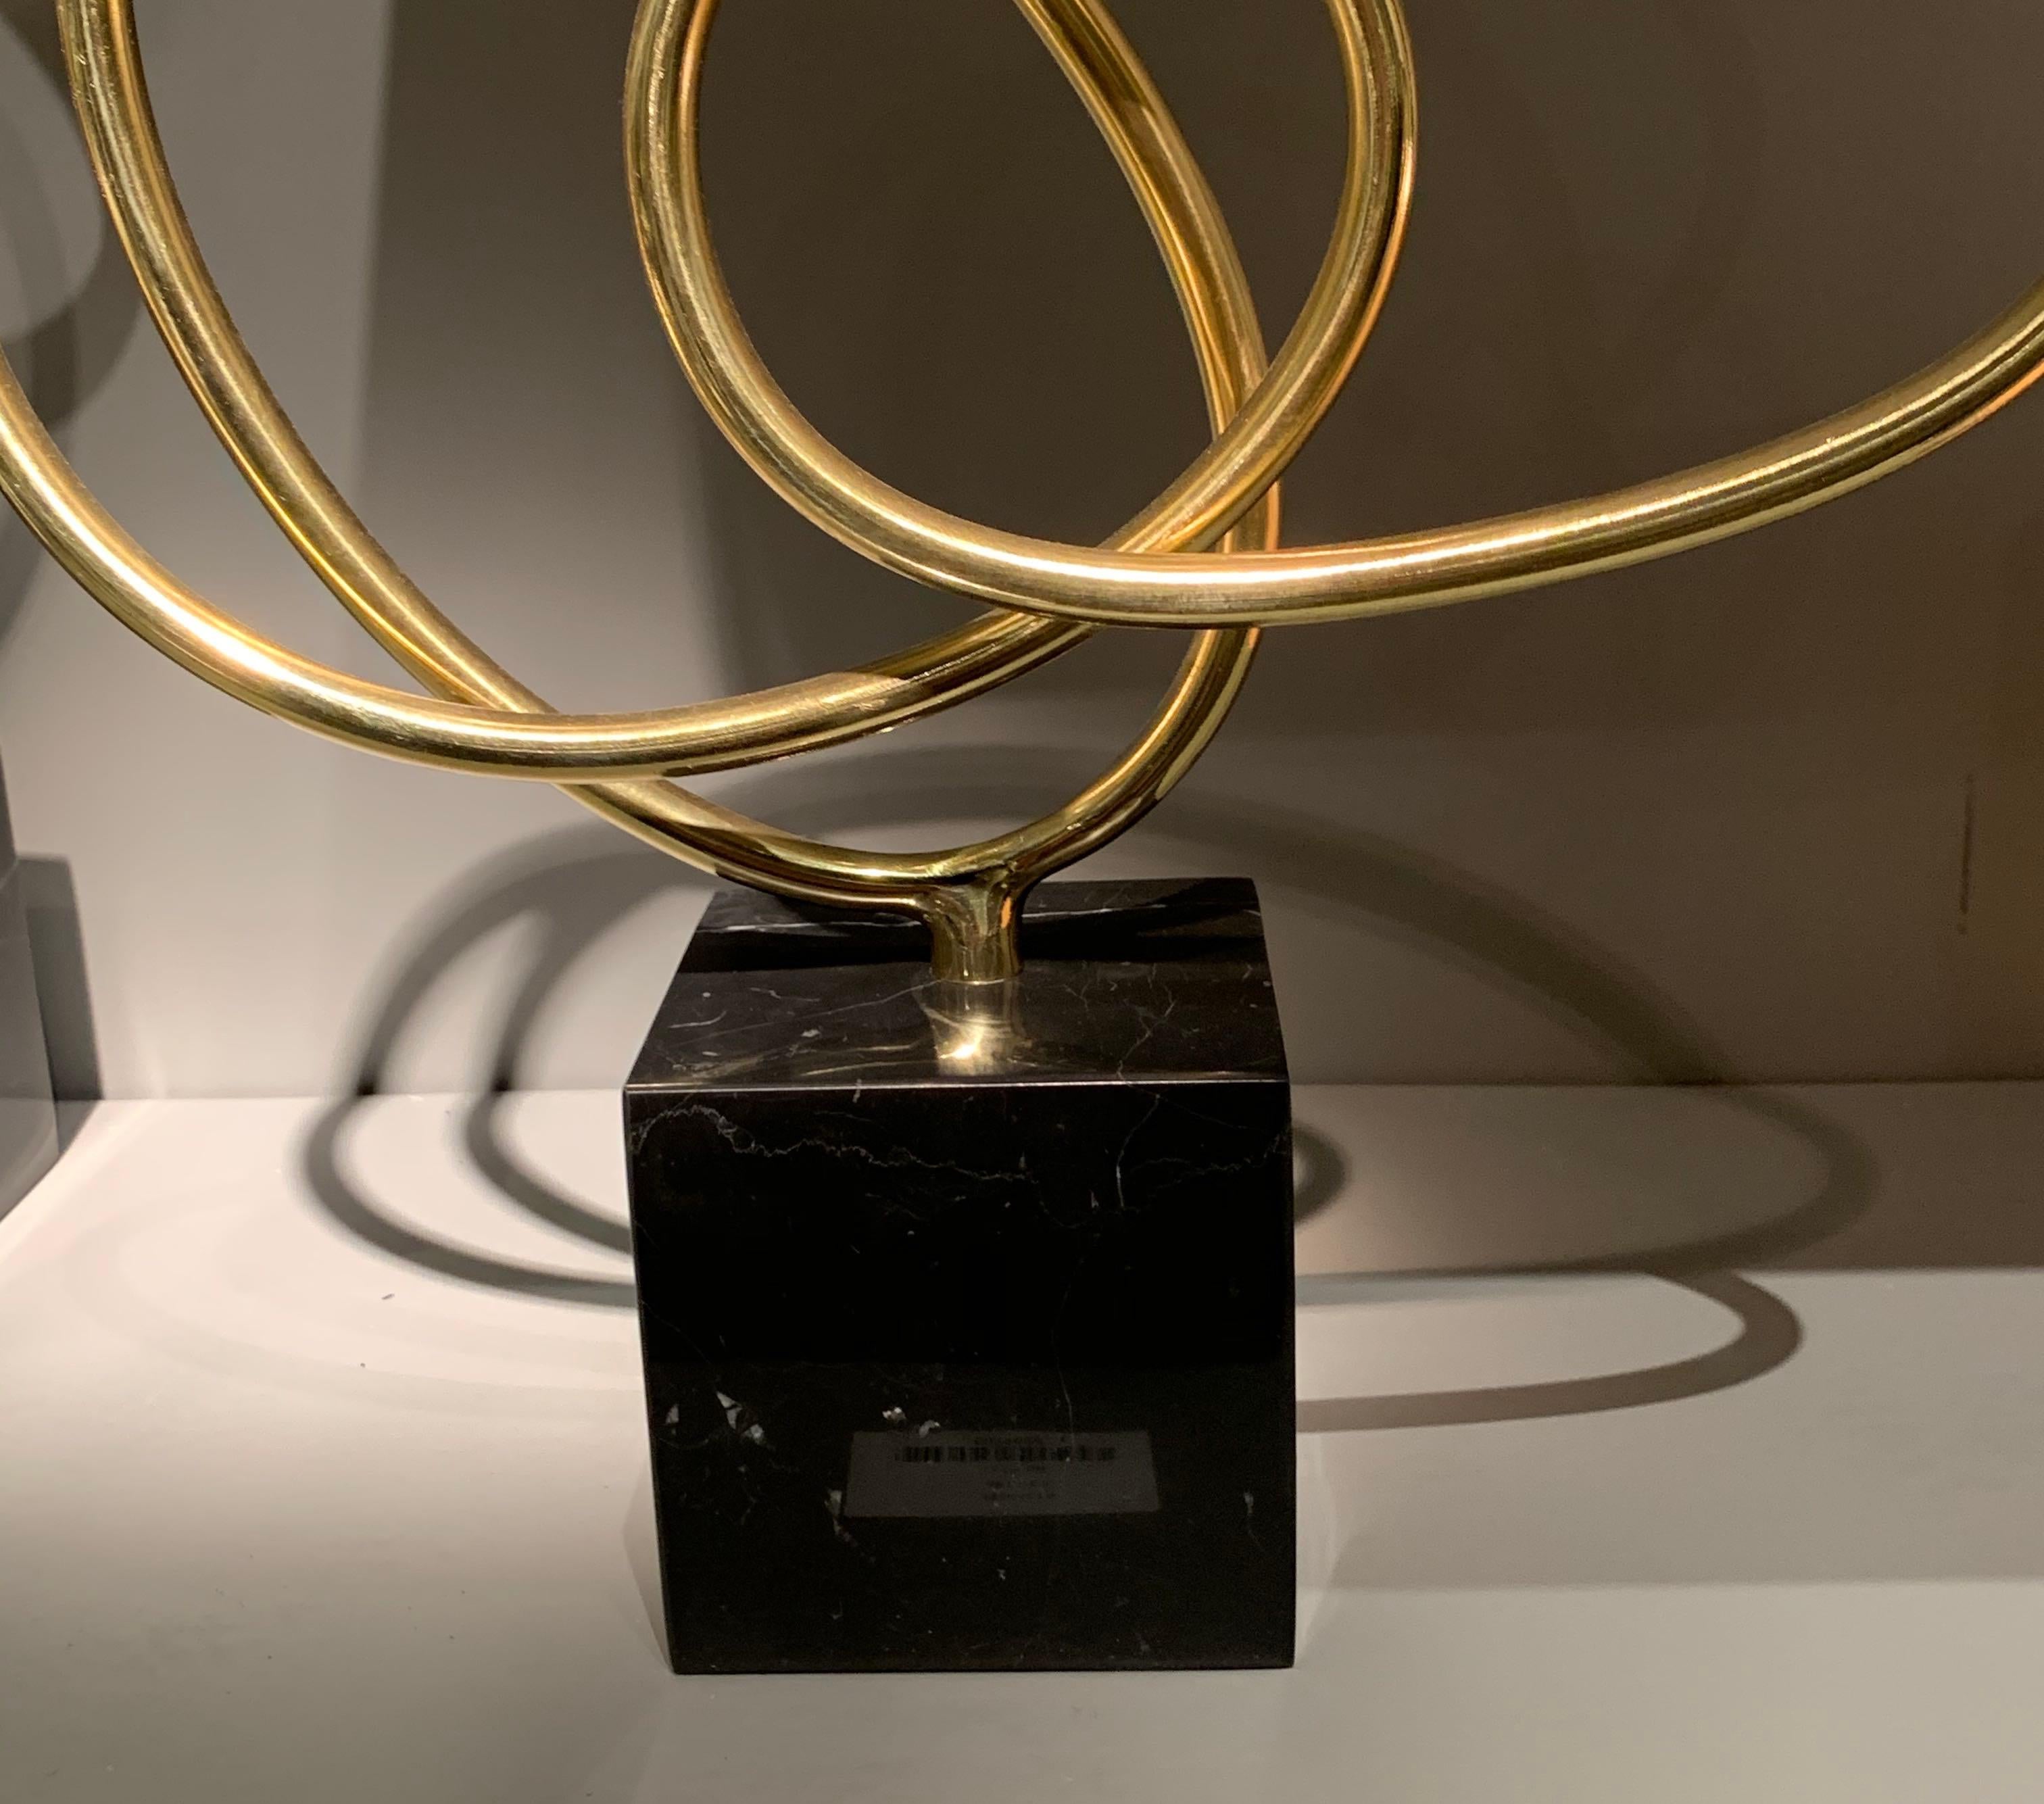 Thin ribbon shaped brass curves in a single piece to create a free form design.
The sculpture is mounted on black marble base.
Two other shapes / designs are also available (S5485, S5487).
The base measures 3.5